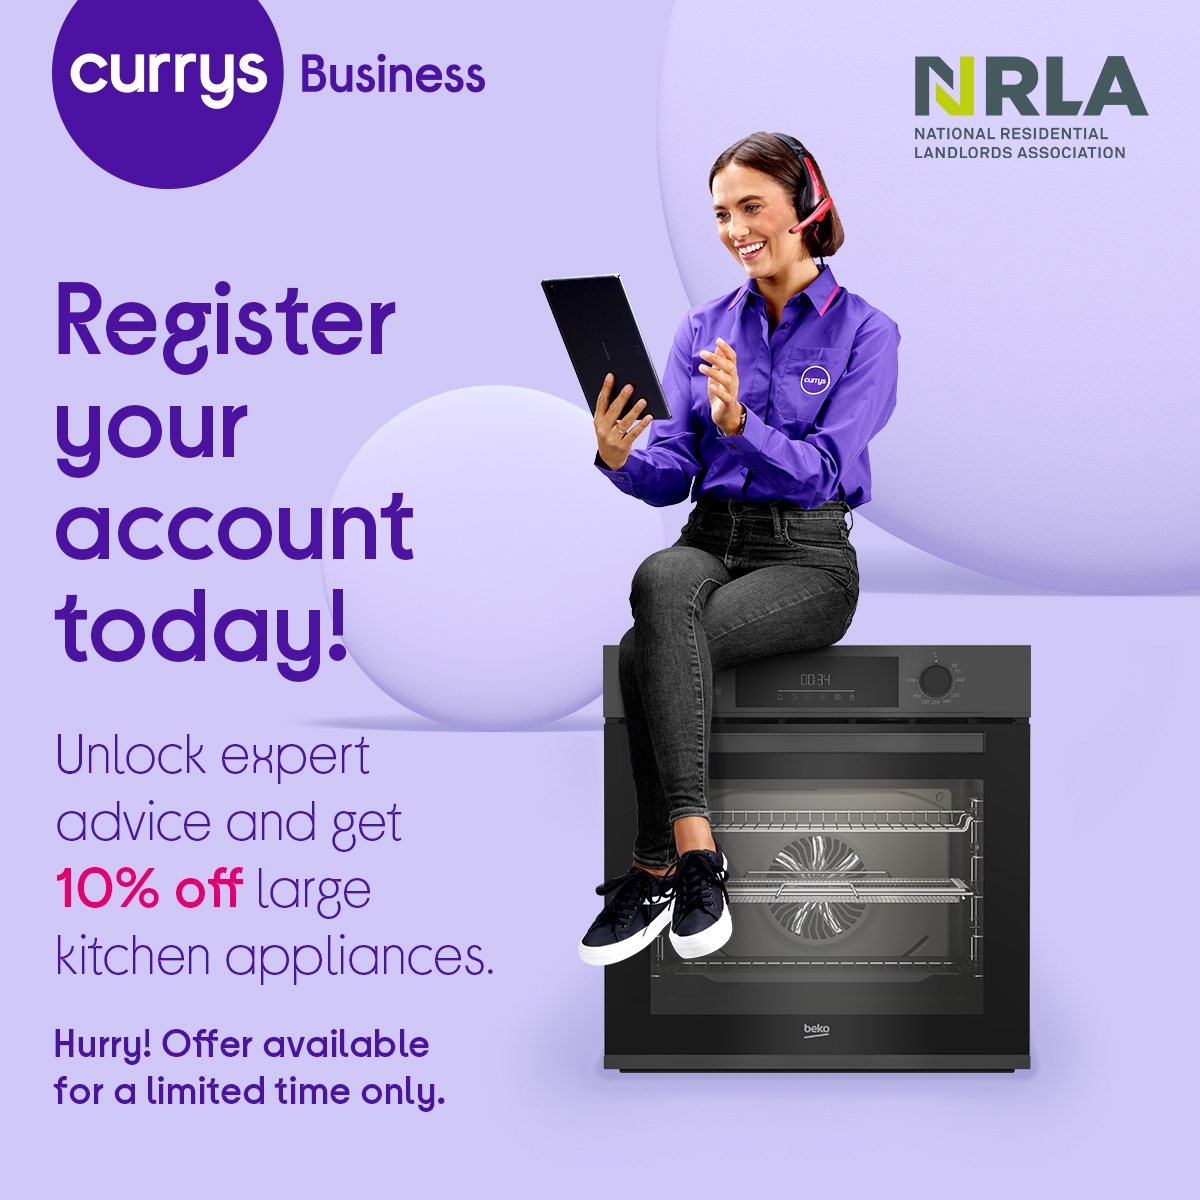 🚨Offer ending soon! | Searching for a new oven for your rental? Or perhaps you need to replace some white goods? Right now NRLA members can get 10% off selected appliances at our partner @currysbusiness! 🛒Shop deals 👇nrla.org.uk/services/currys #memberbenefits #nrla